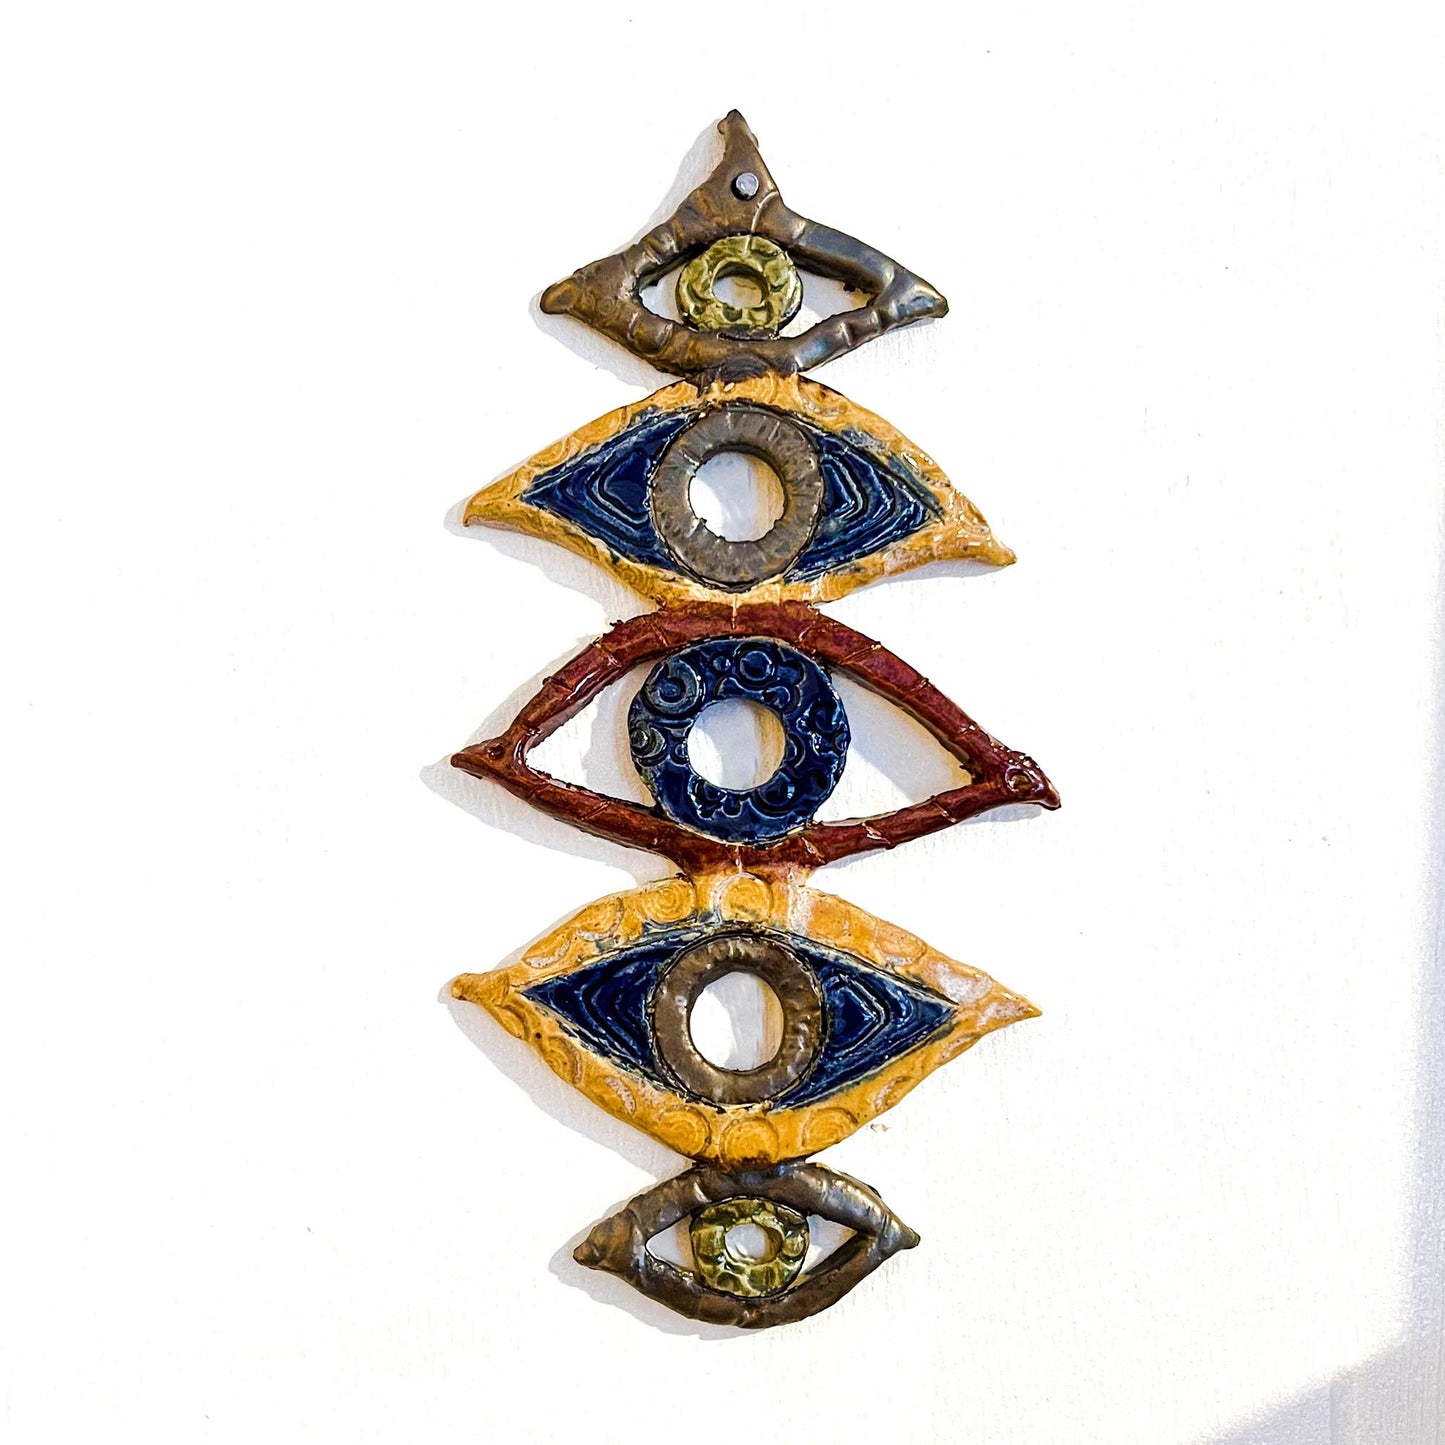 Melas Five High Abstract Eye Ceramic Wall Art; wall art; ceramic; eyes; eye; abstract; Melasdesign Handmade; hanging; Mela's Eye Collection; one of a kind; small business; Thomas WV